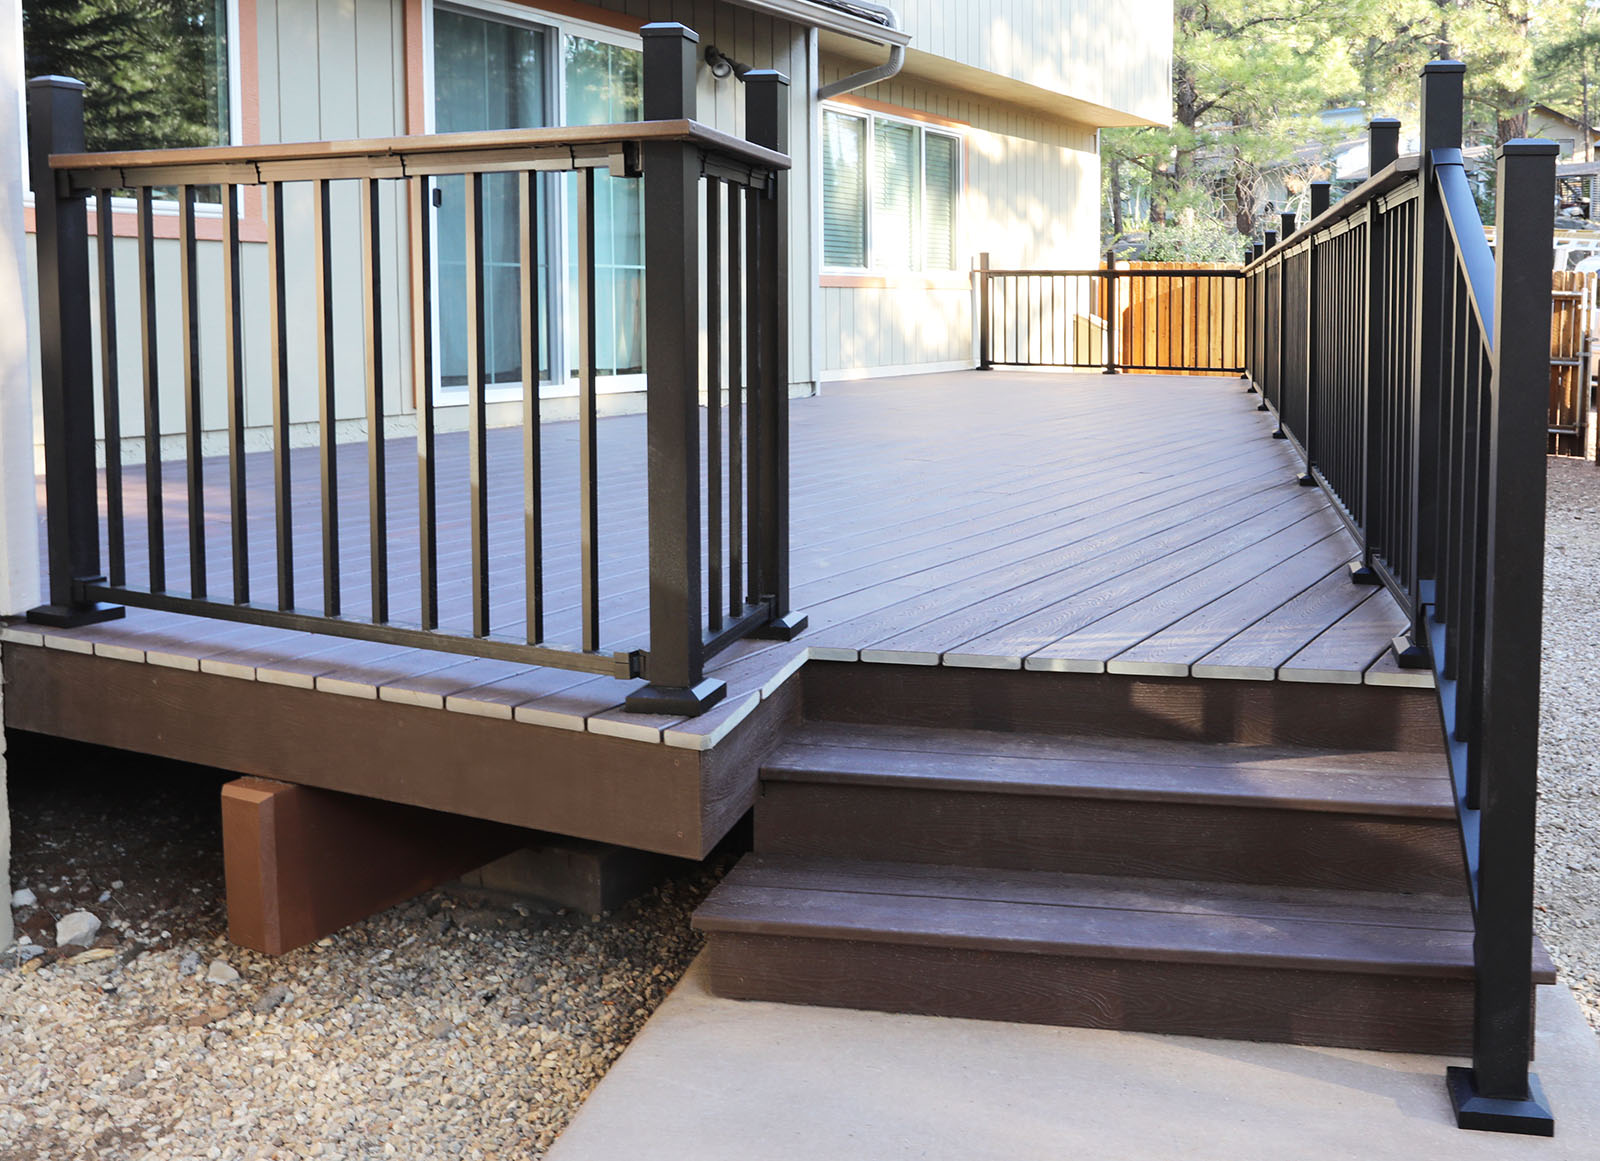 Trex decking with Signature railing and Trex Cocktail rail in Flagstaff AZ